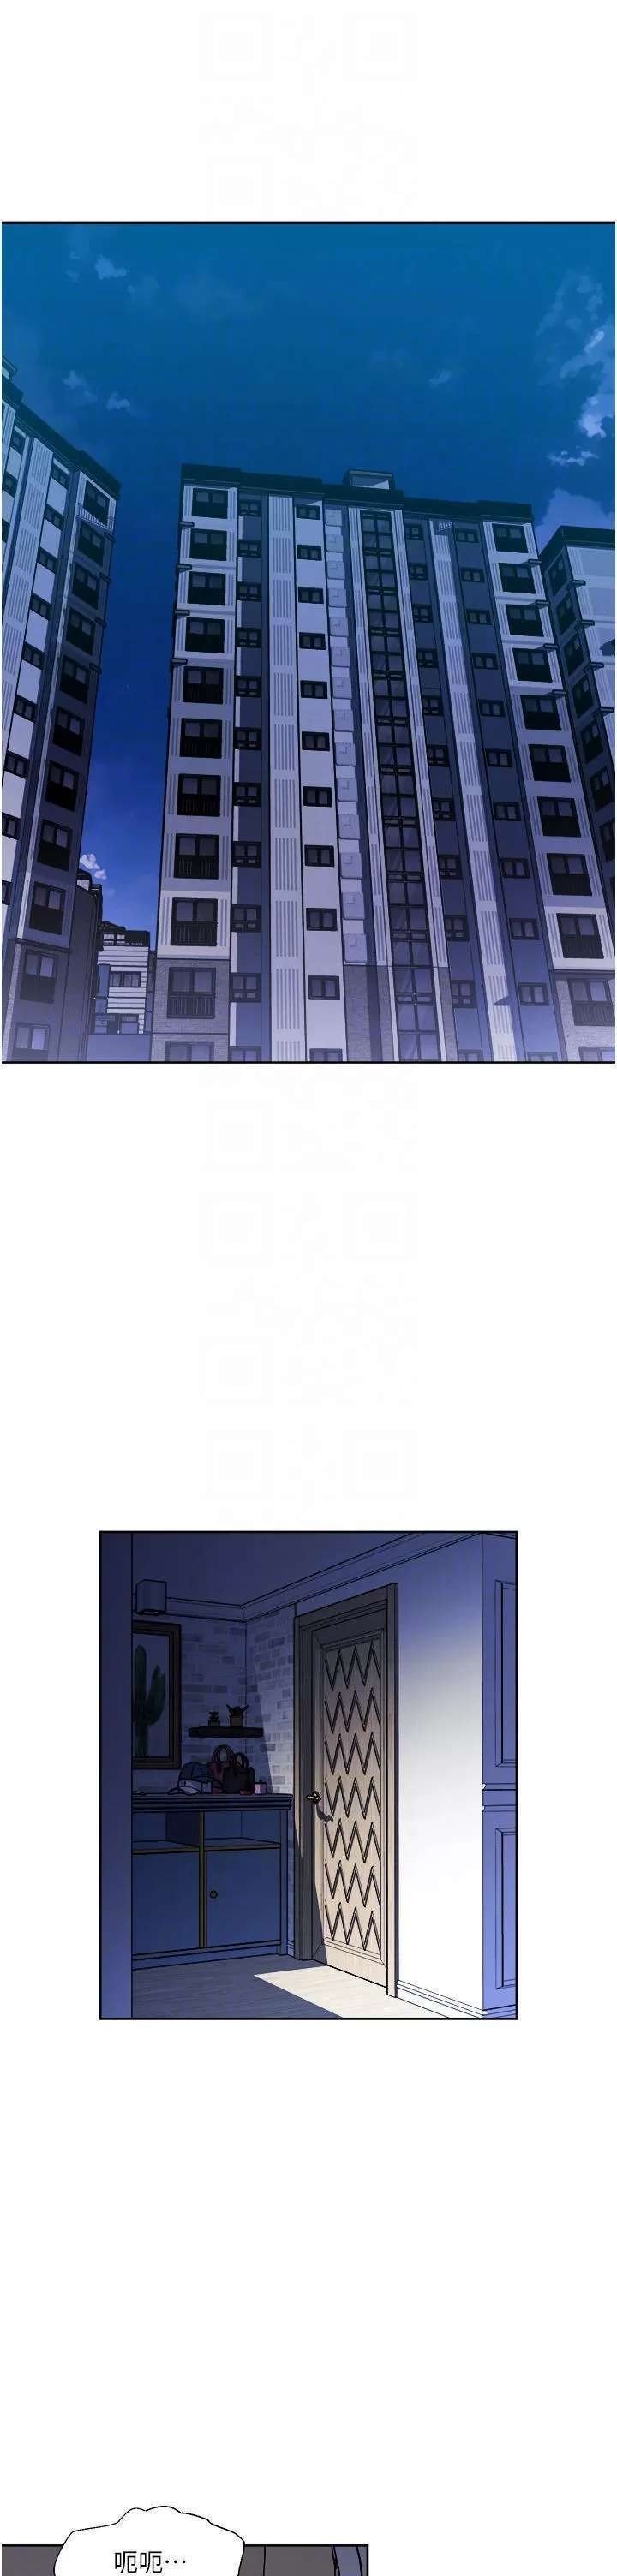 just-once-raw-chap-39-4